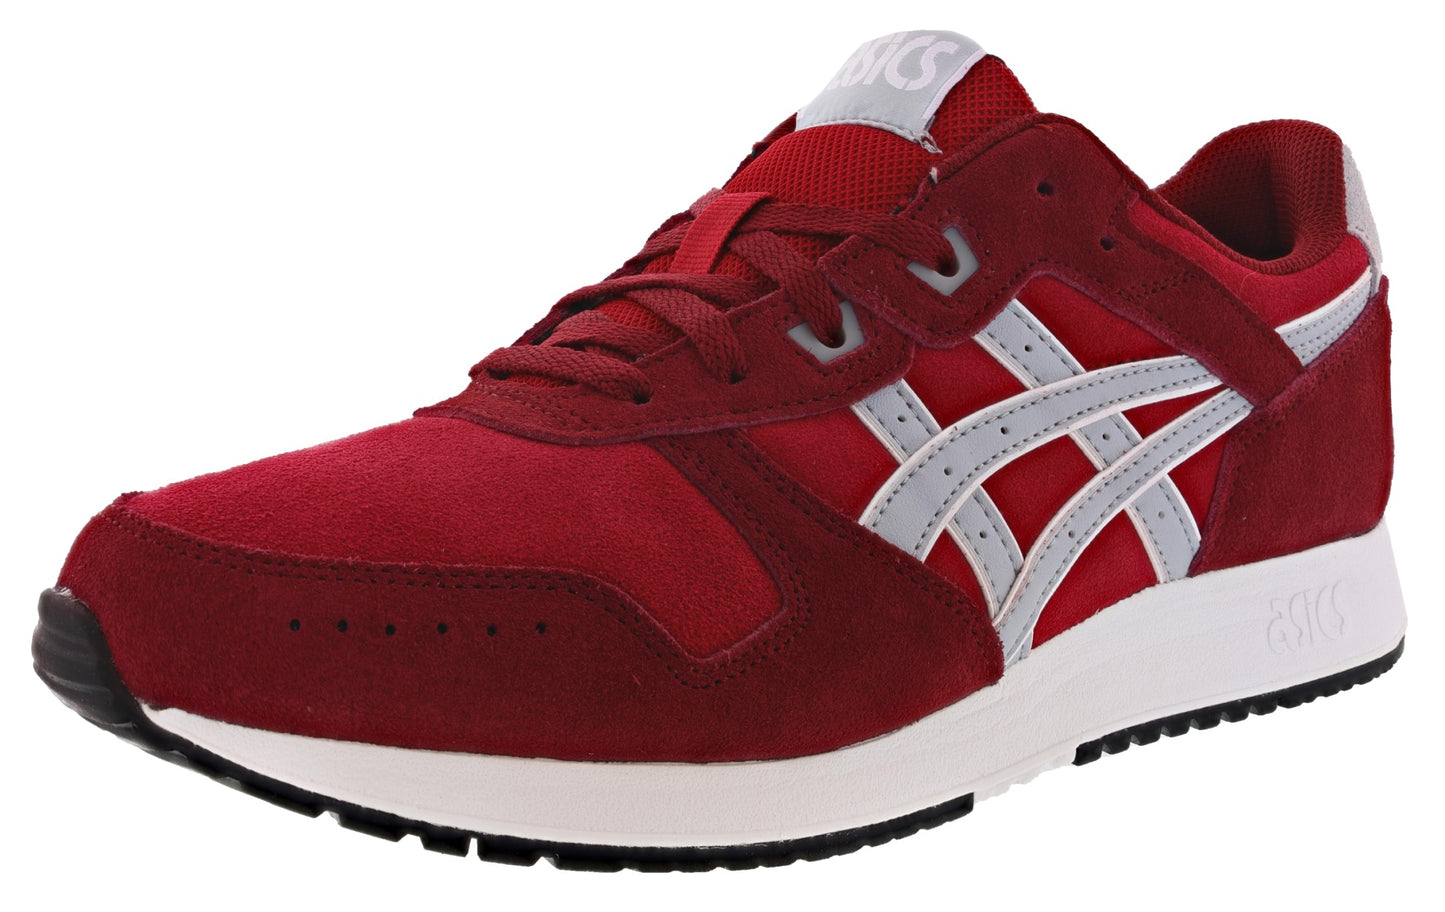 Lateral of Beet Juice/Piedmont Grey Asics Men's Lyte Classic Lightweight Comfort Walking Shoes